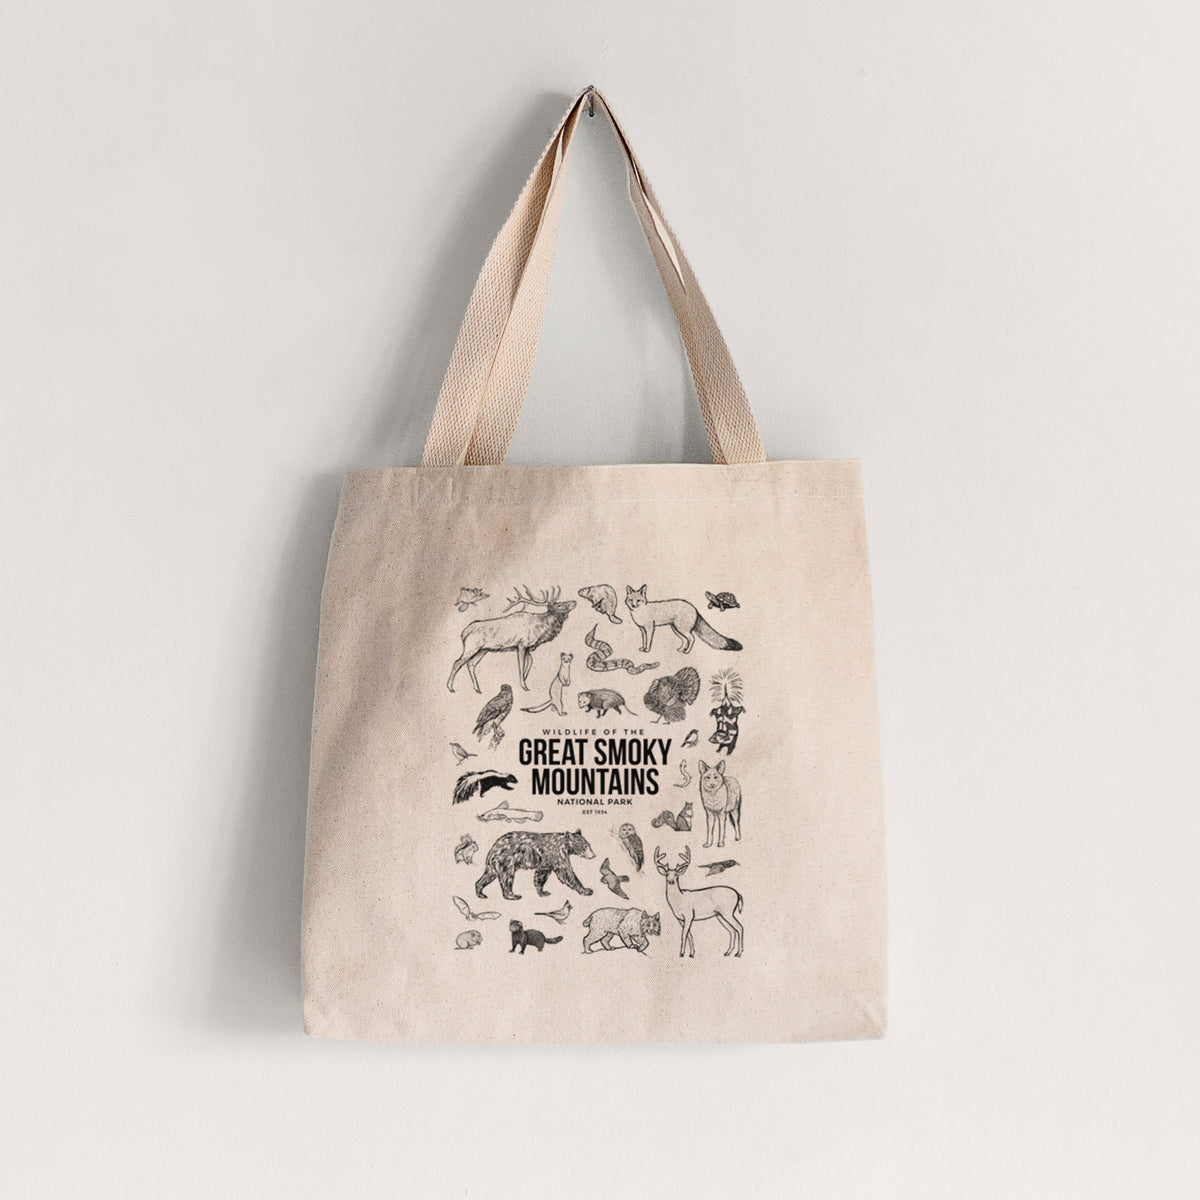 Wildlife of the Great Smoky Mountains National Park - Tote Bag